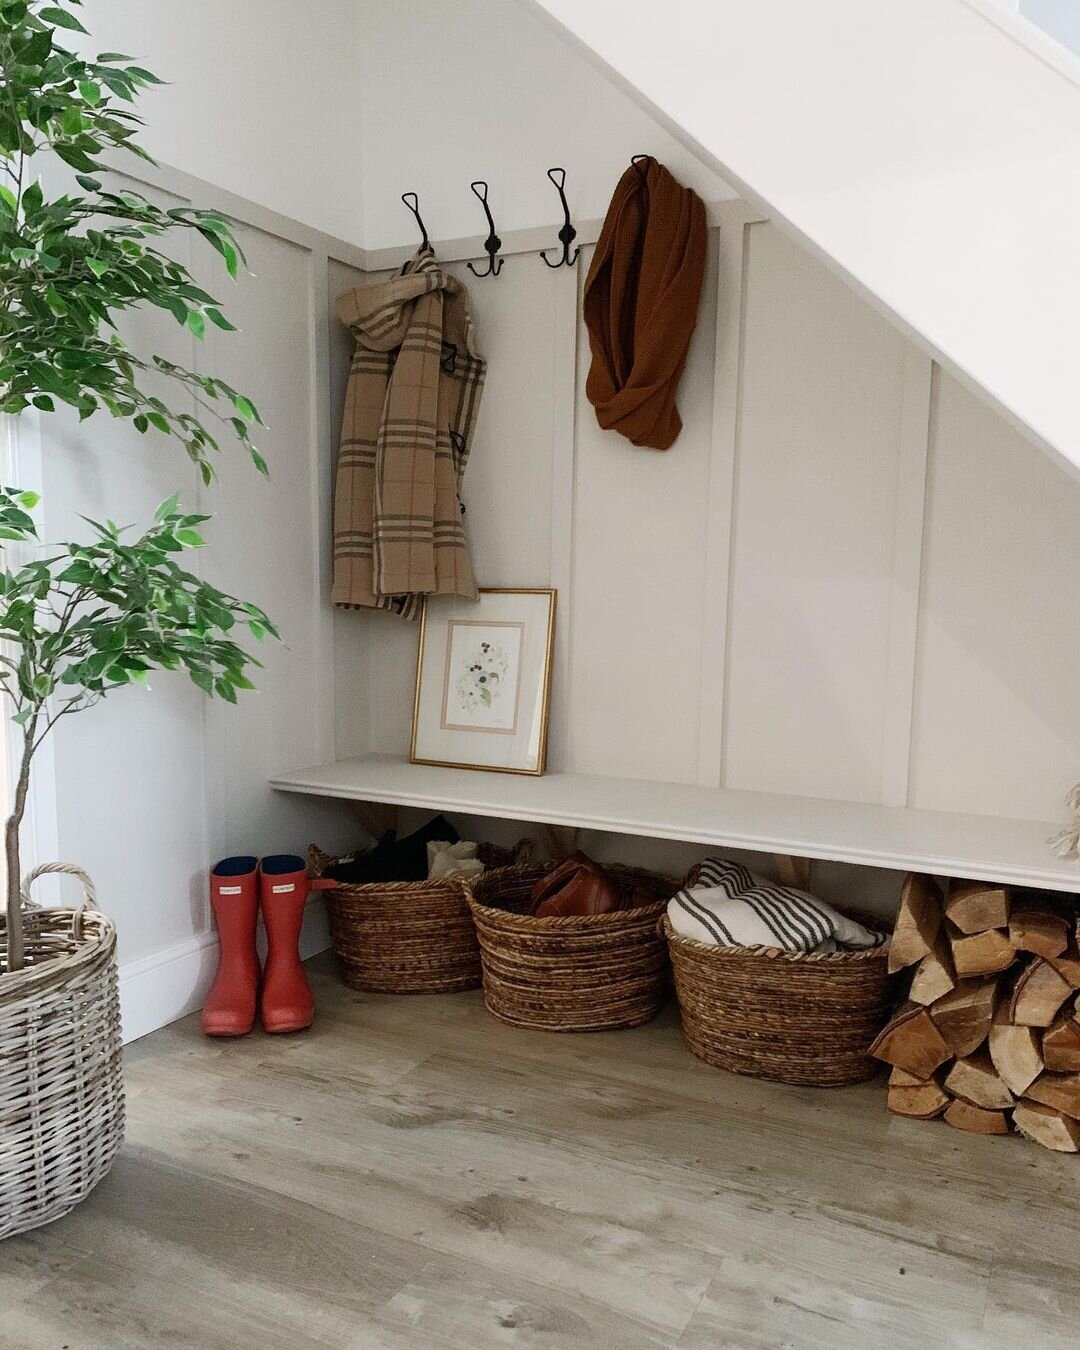 Under stair storage area for boots and coats - IMAGE: @my_best_laid_plans